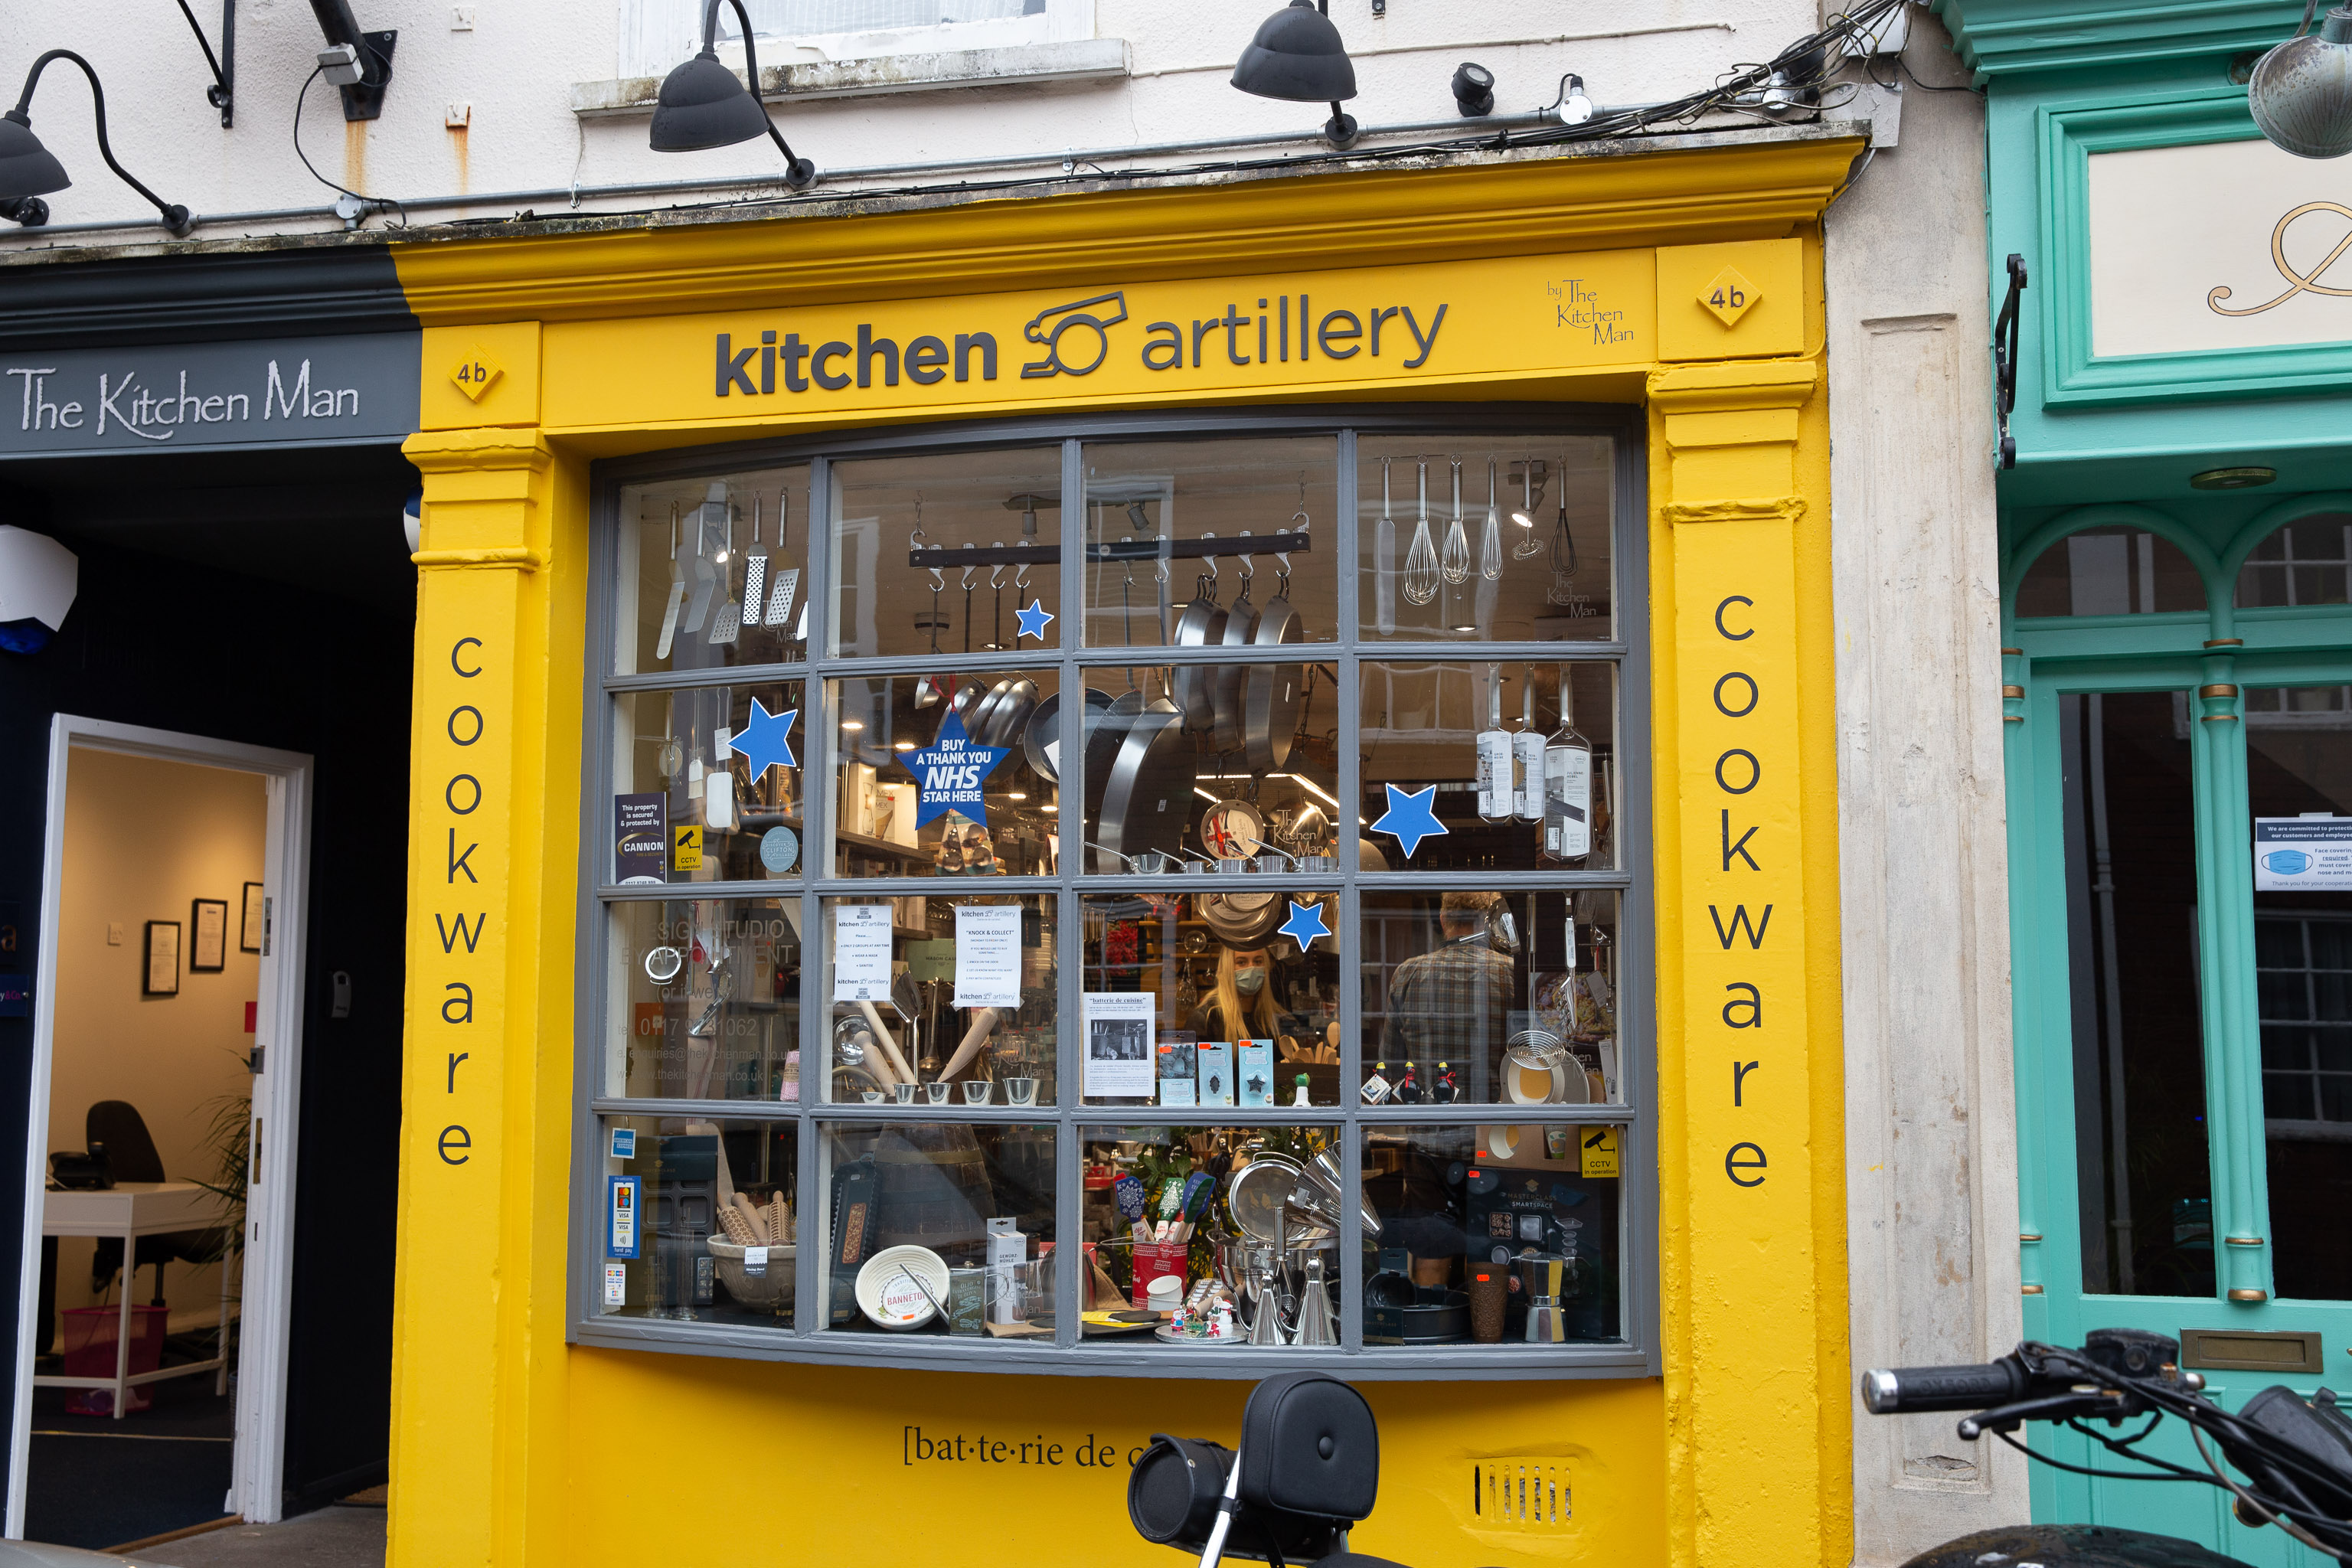 Kitchen Artillery
It's a great name for a shop and a striking colour to boot. Excellent marketing, and closer to me than my traditional haunt of Kitchens Cookshop at...